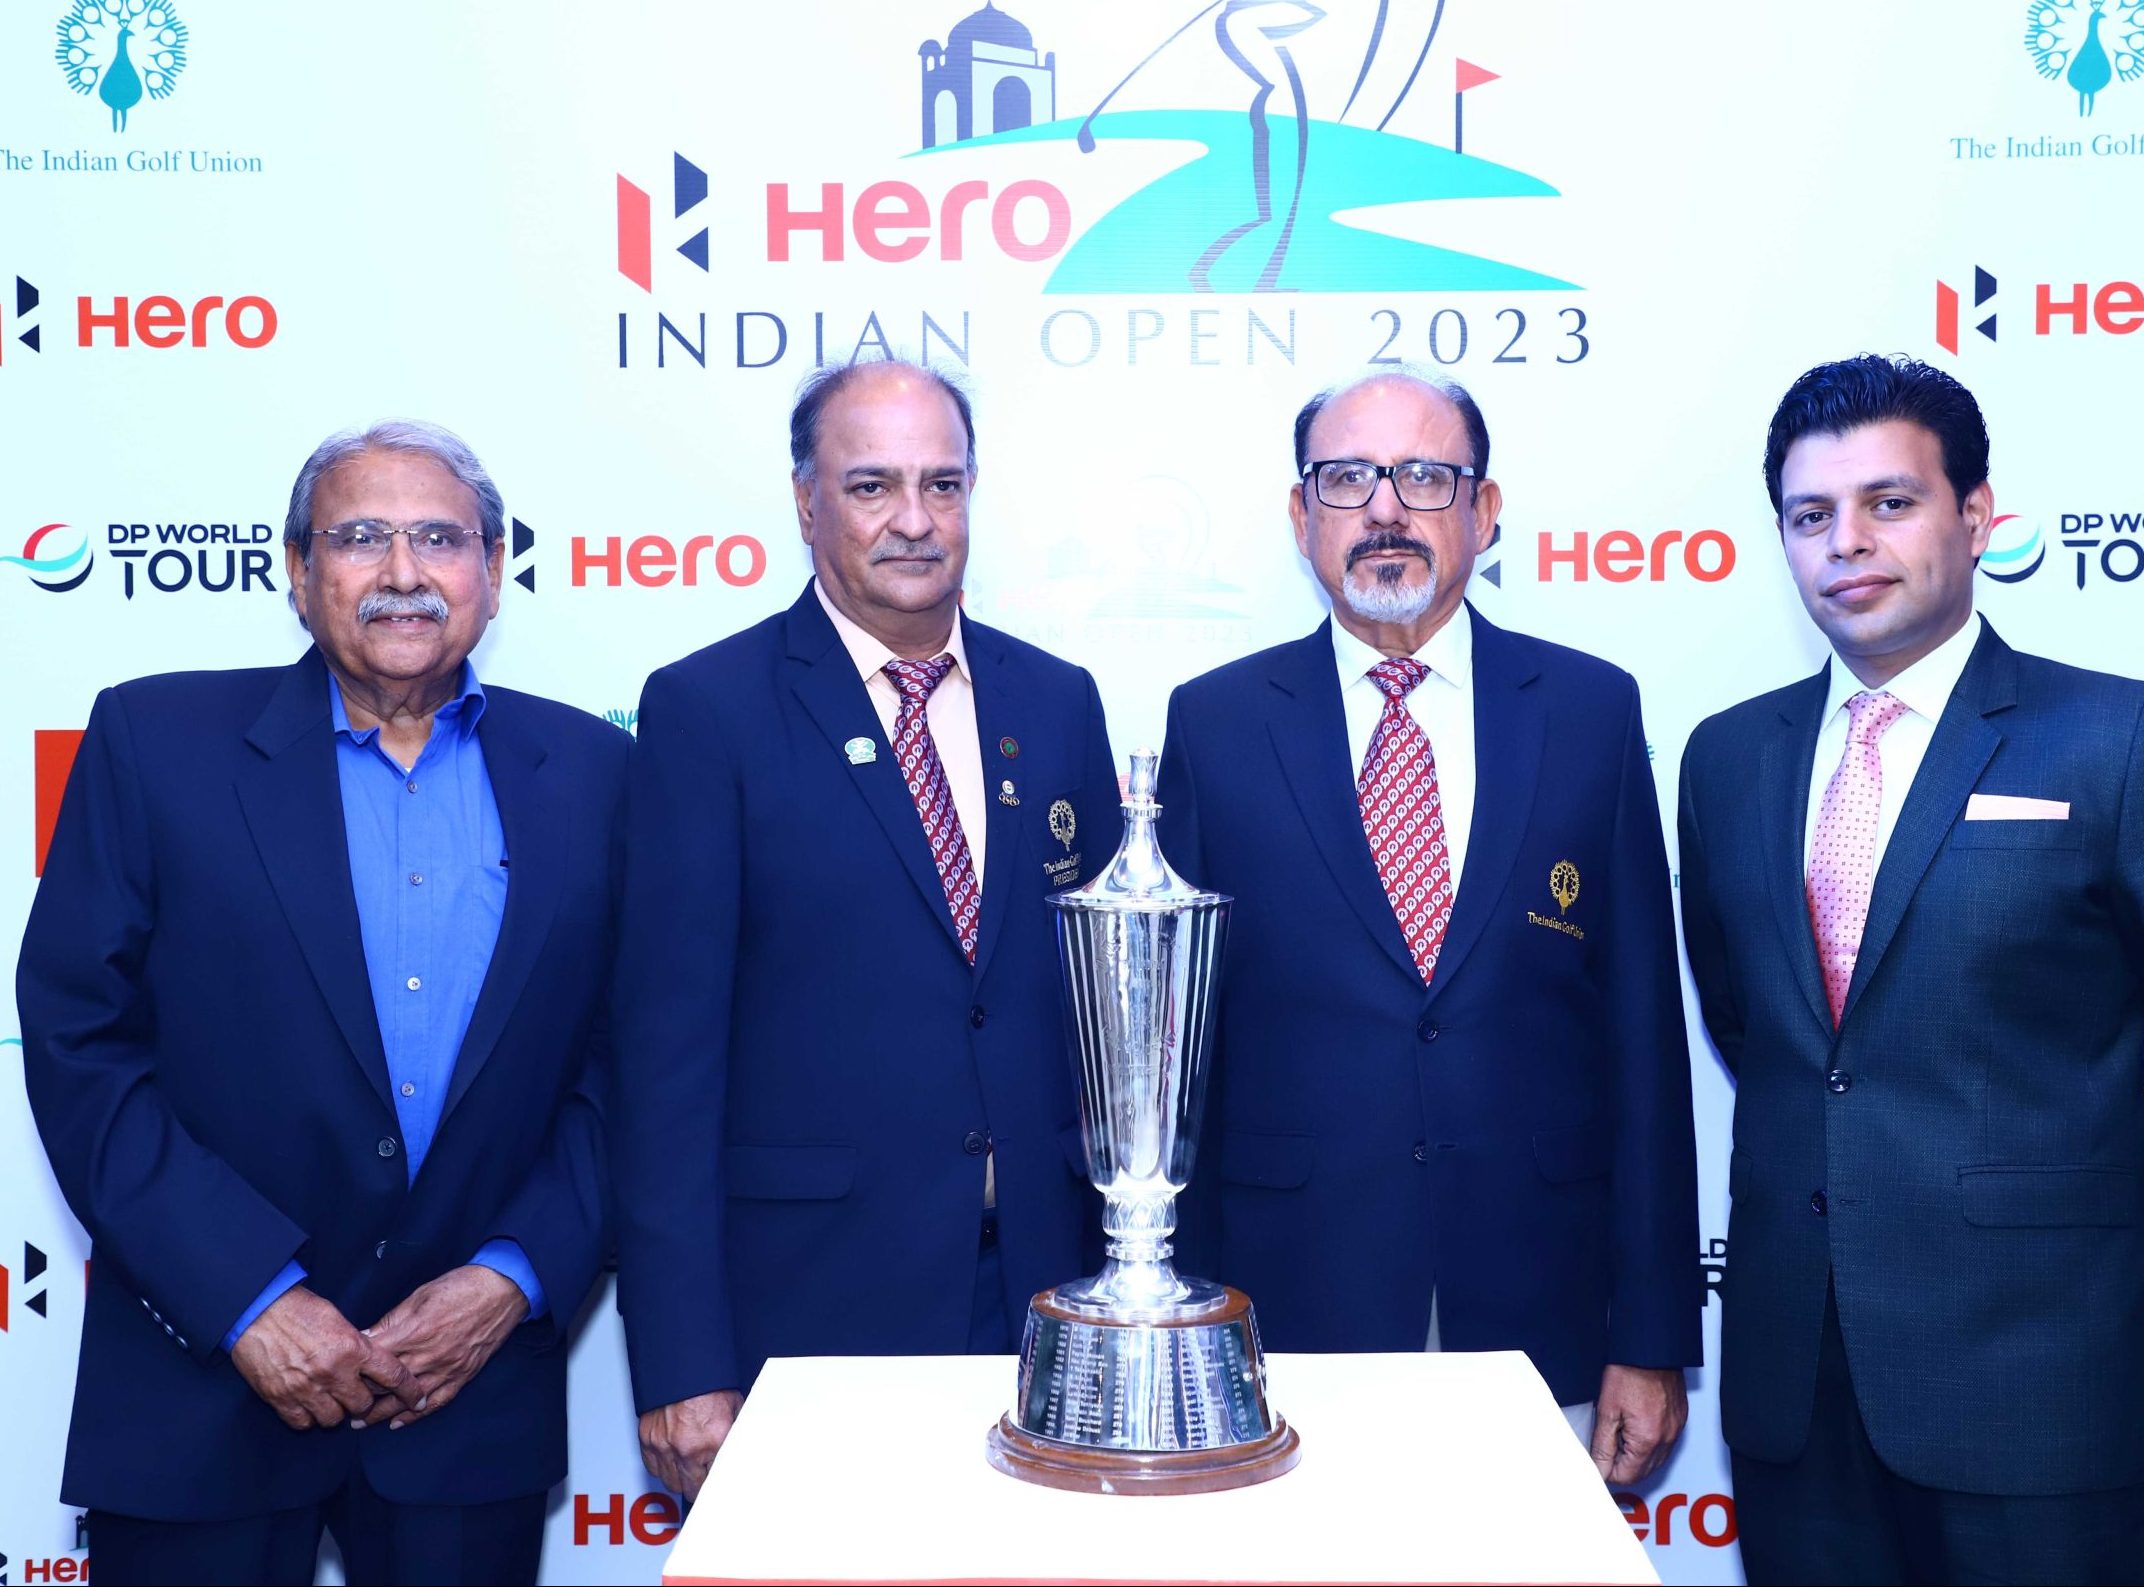 HERO INDIAN OPEN RETURNS WITH RECORD PRIZE PURSE OF US 2 MILLION